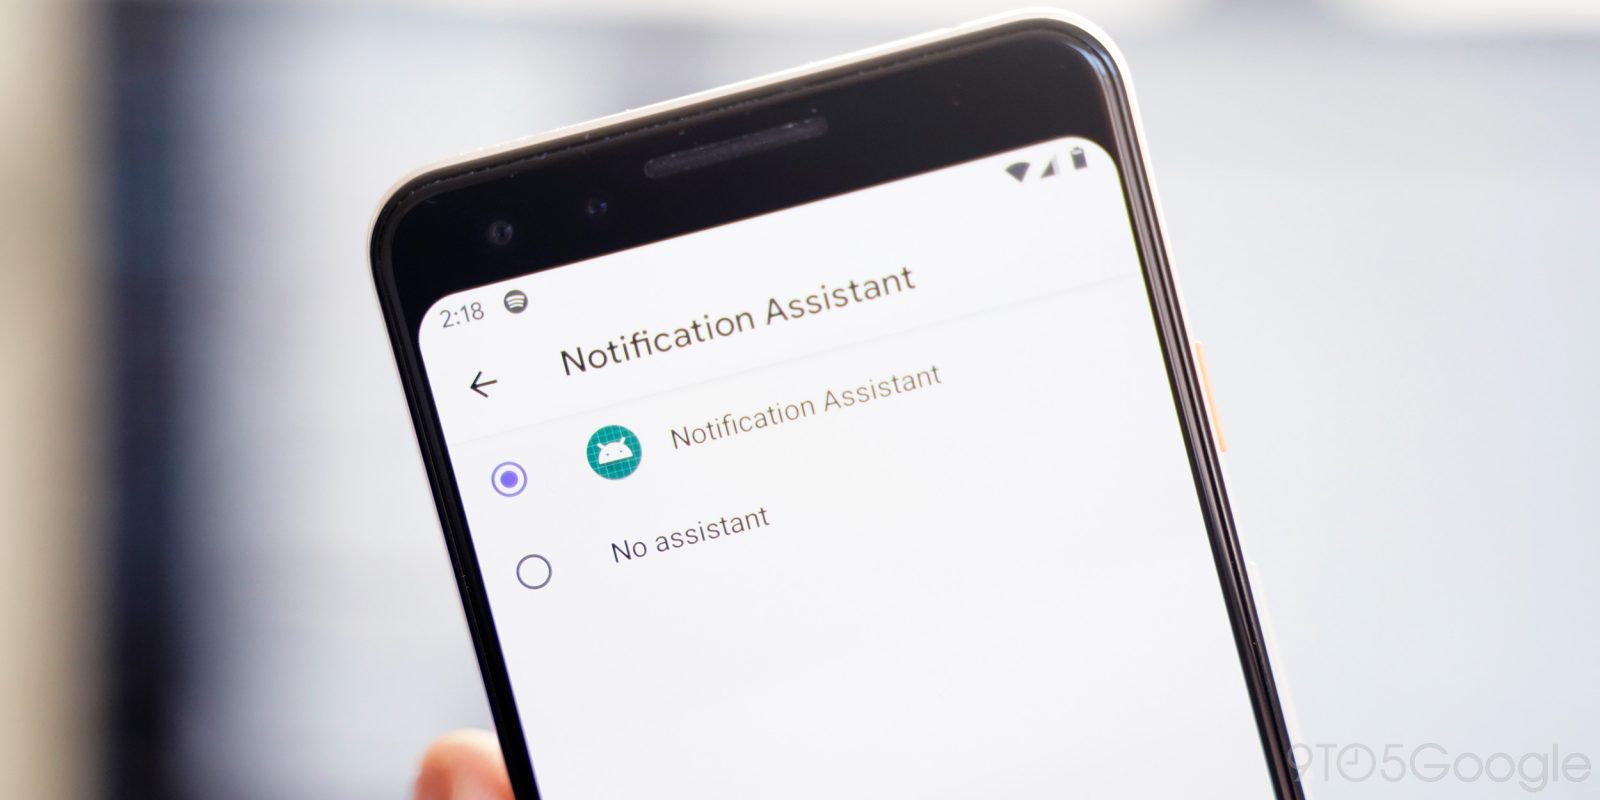 Android Q Beta 2 Notification Assistant